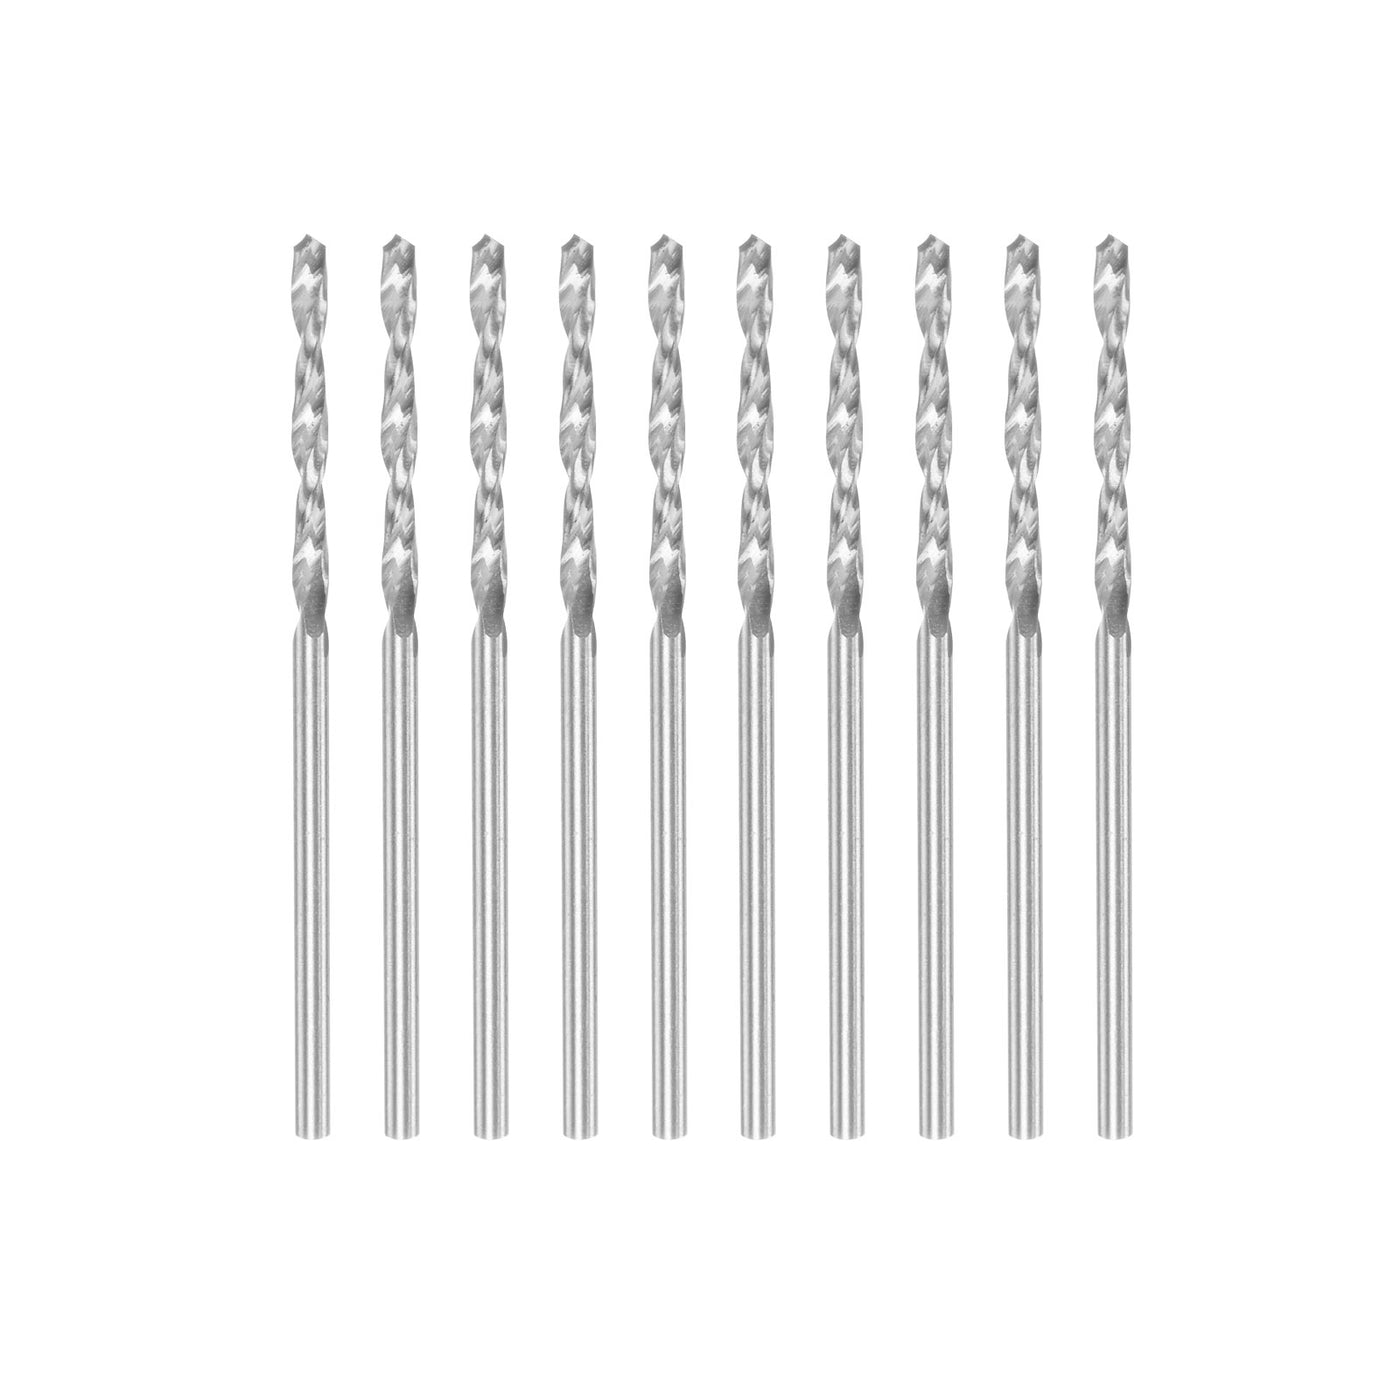 uxcell Uxcell 10 Pcs 1.7mm High Speed Steel Drill Bits, Fully Ground 43mm Length Drill Bit